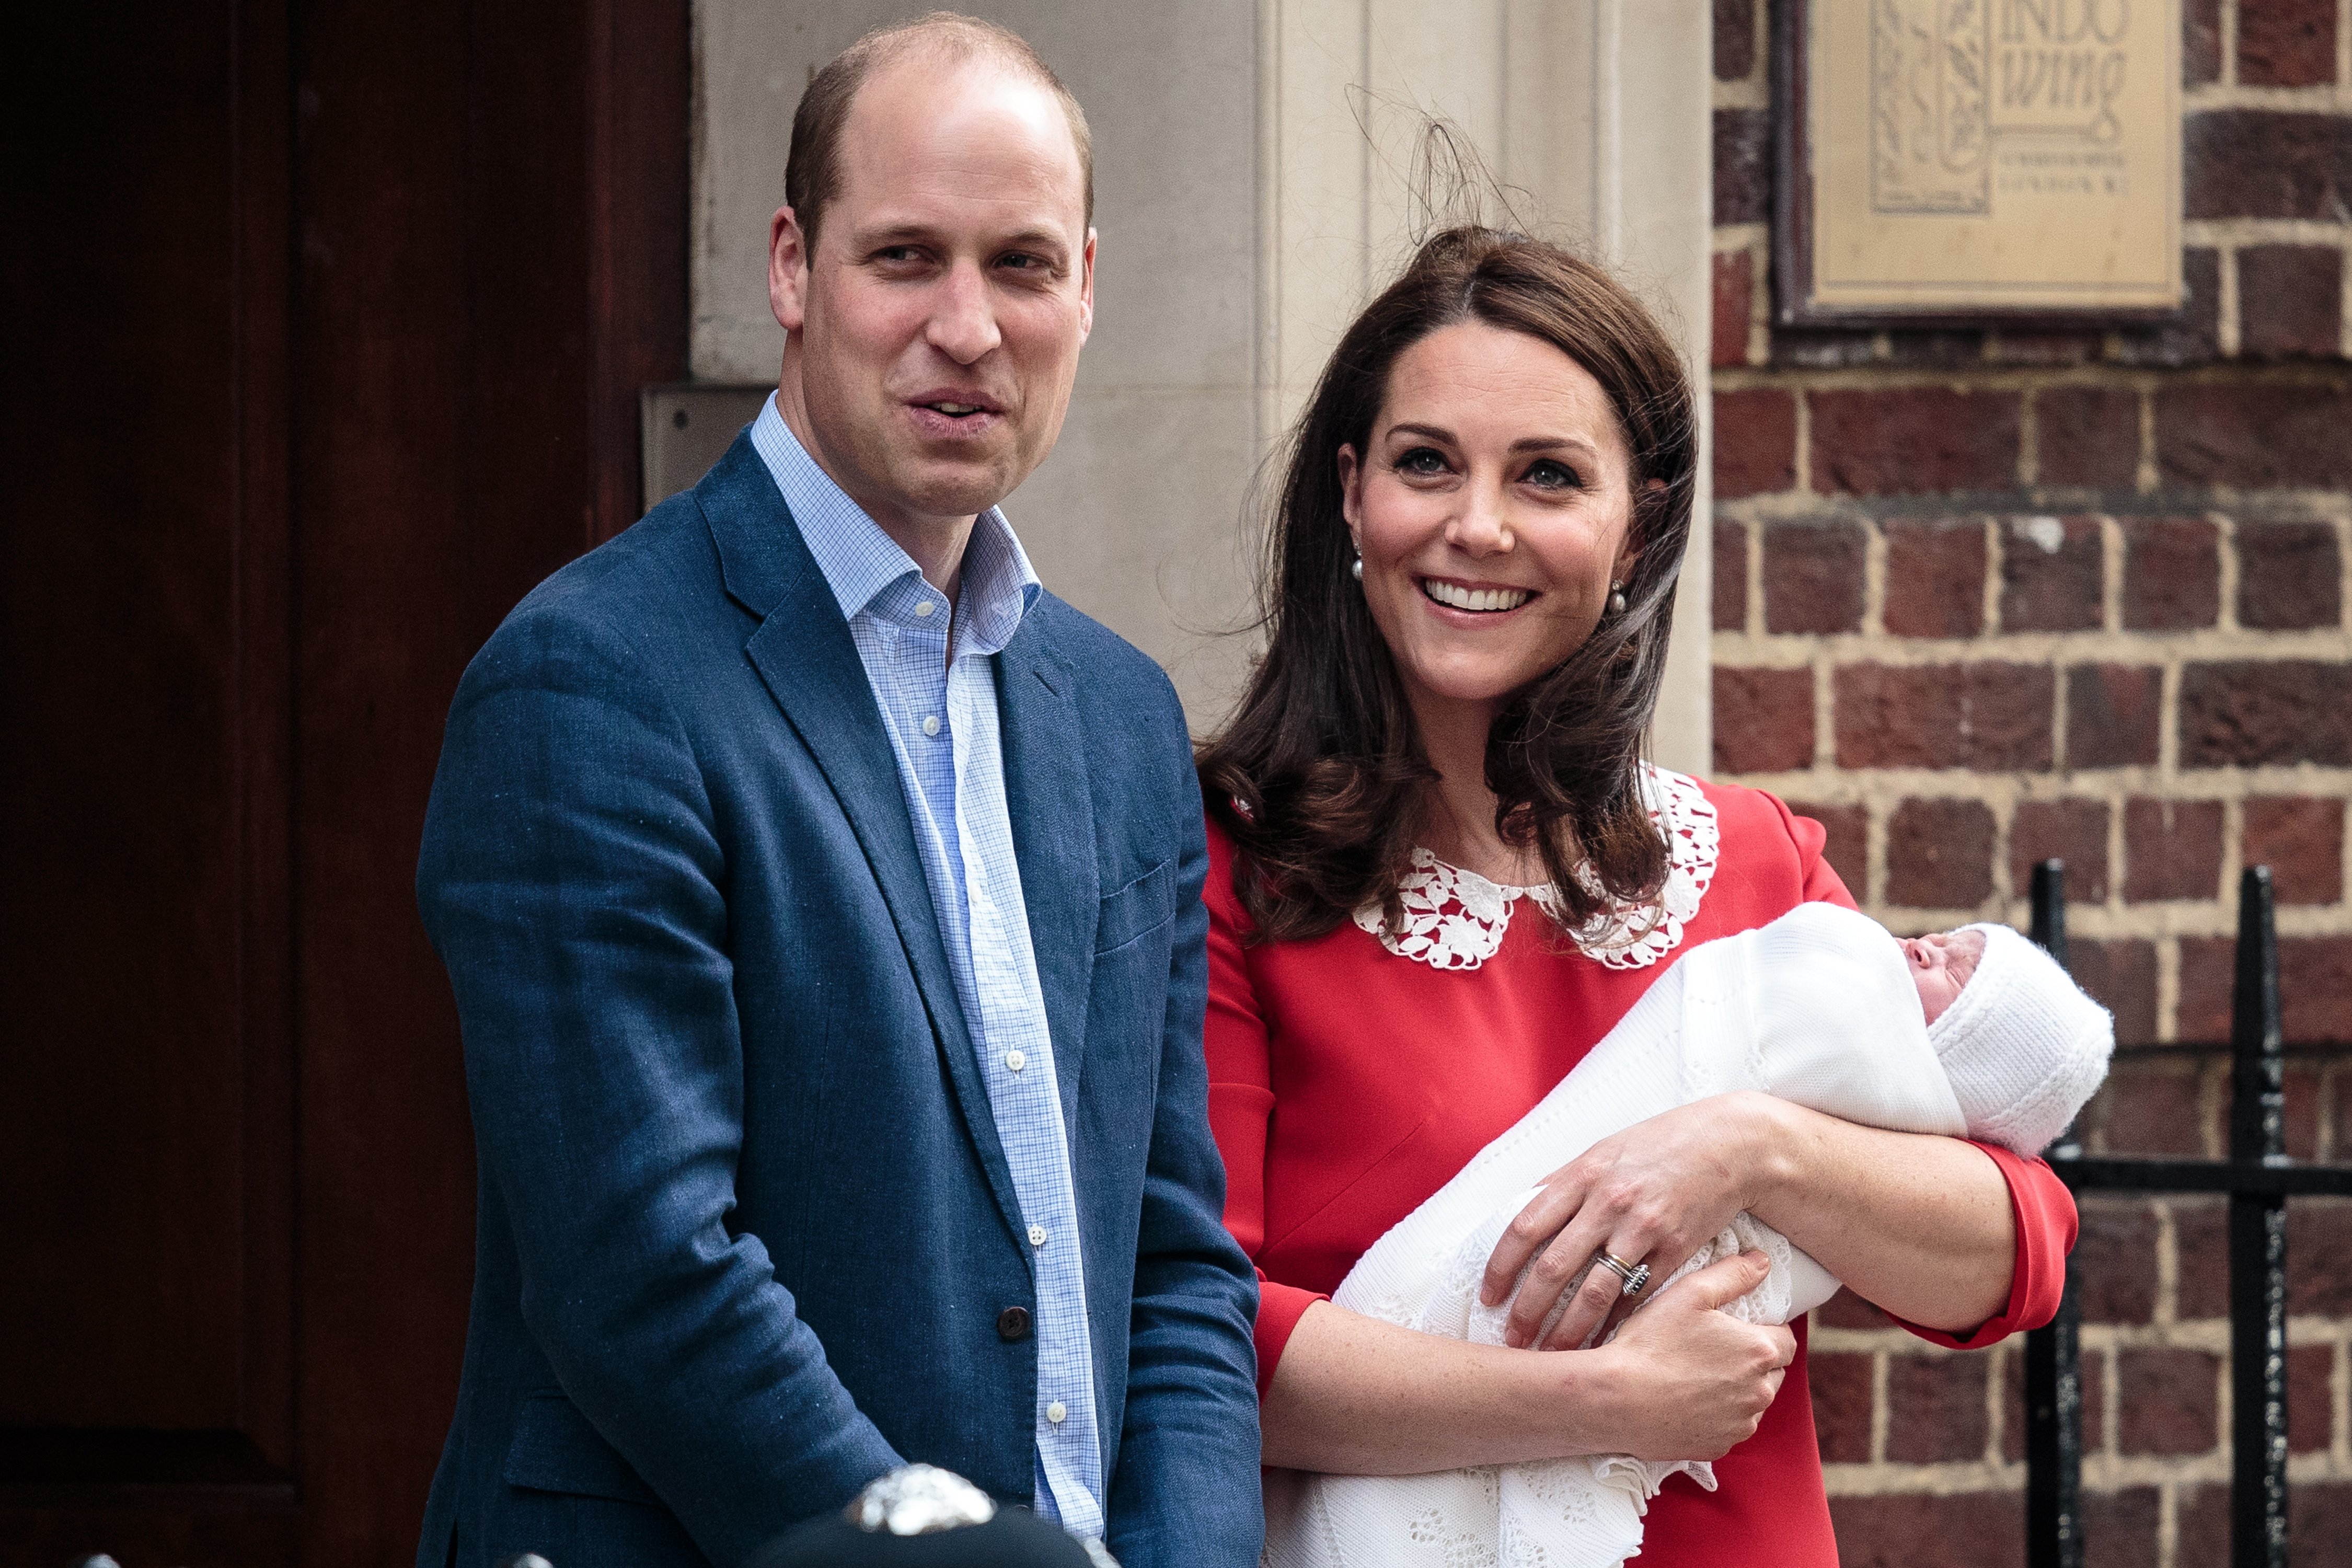 Prince William and his wife Kate Middleton with their newborn Prince Louis outside the Lindo Wing of St. Mary's Hospital in London England on April 23, 2018 | Source: Getty Images